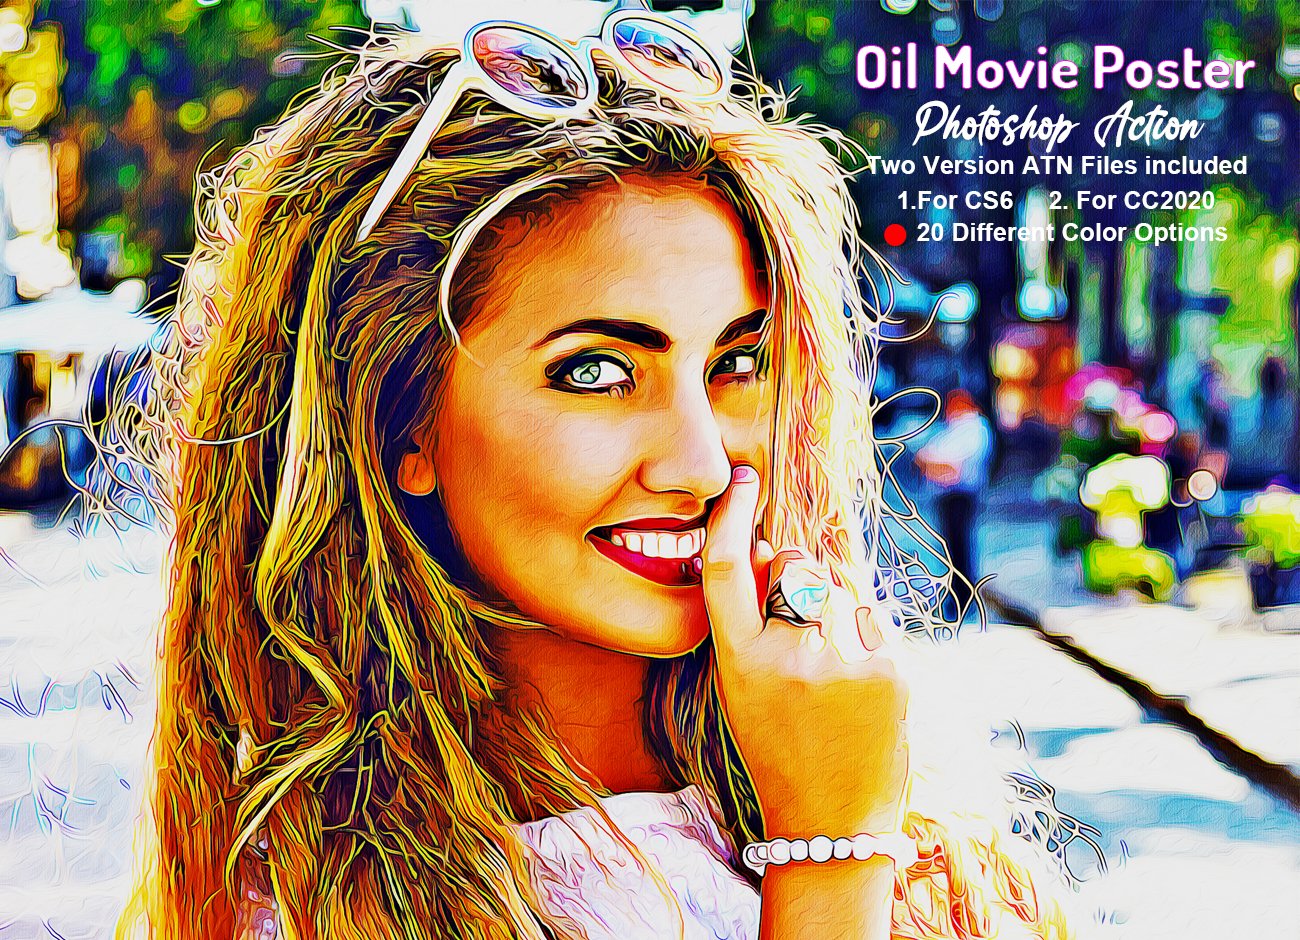 Oil Movie Poster Photoshop Actioncover image.